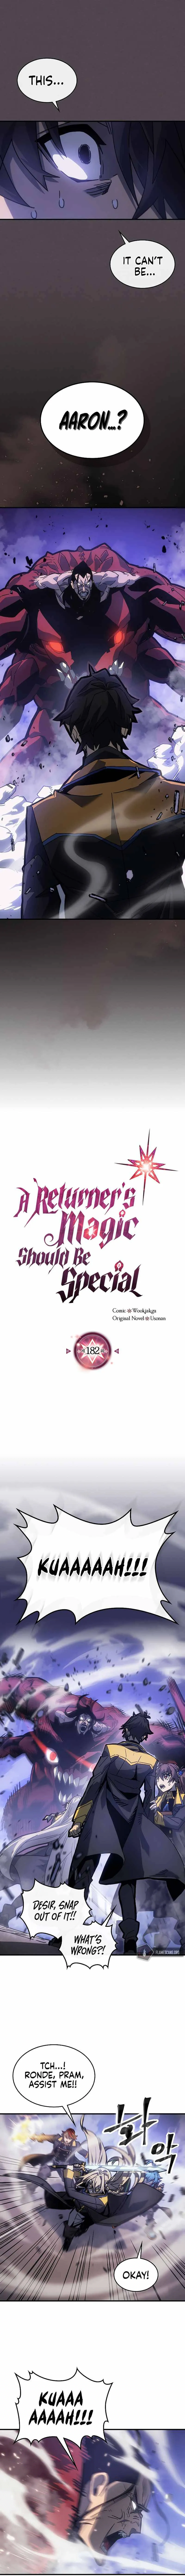 A Returner's Magic Should Be Special Chapter 182 page 3